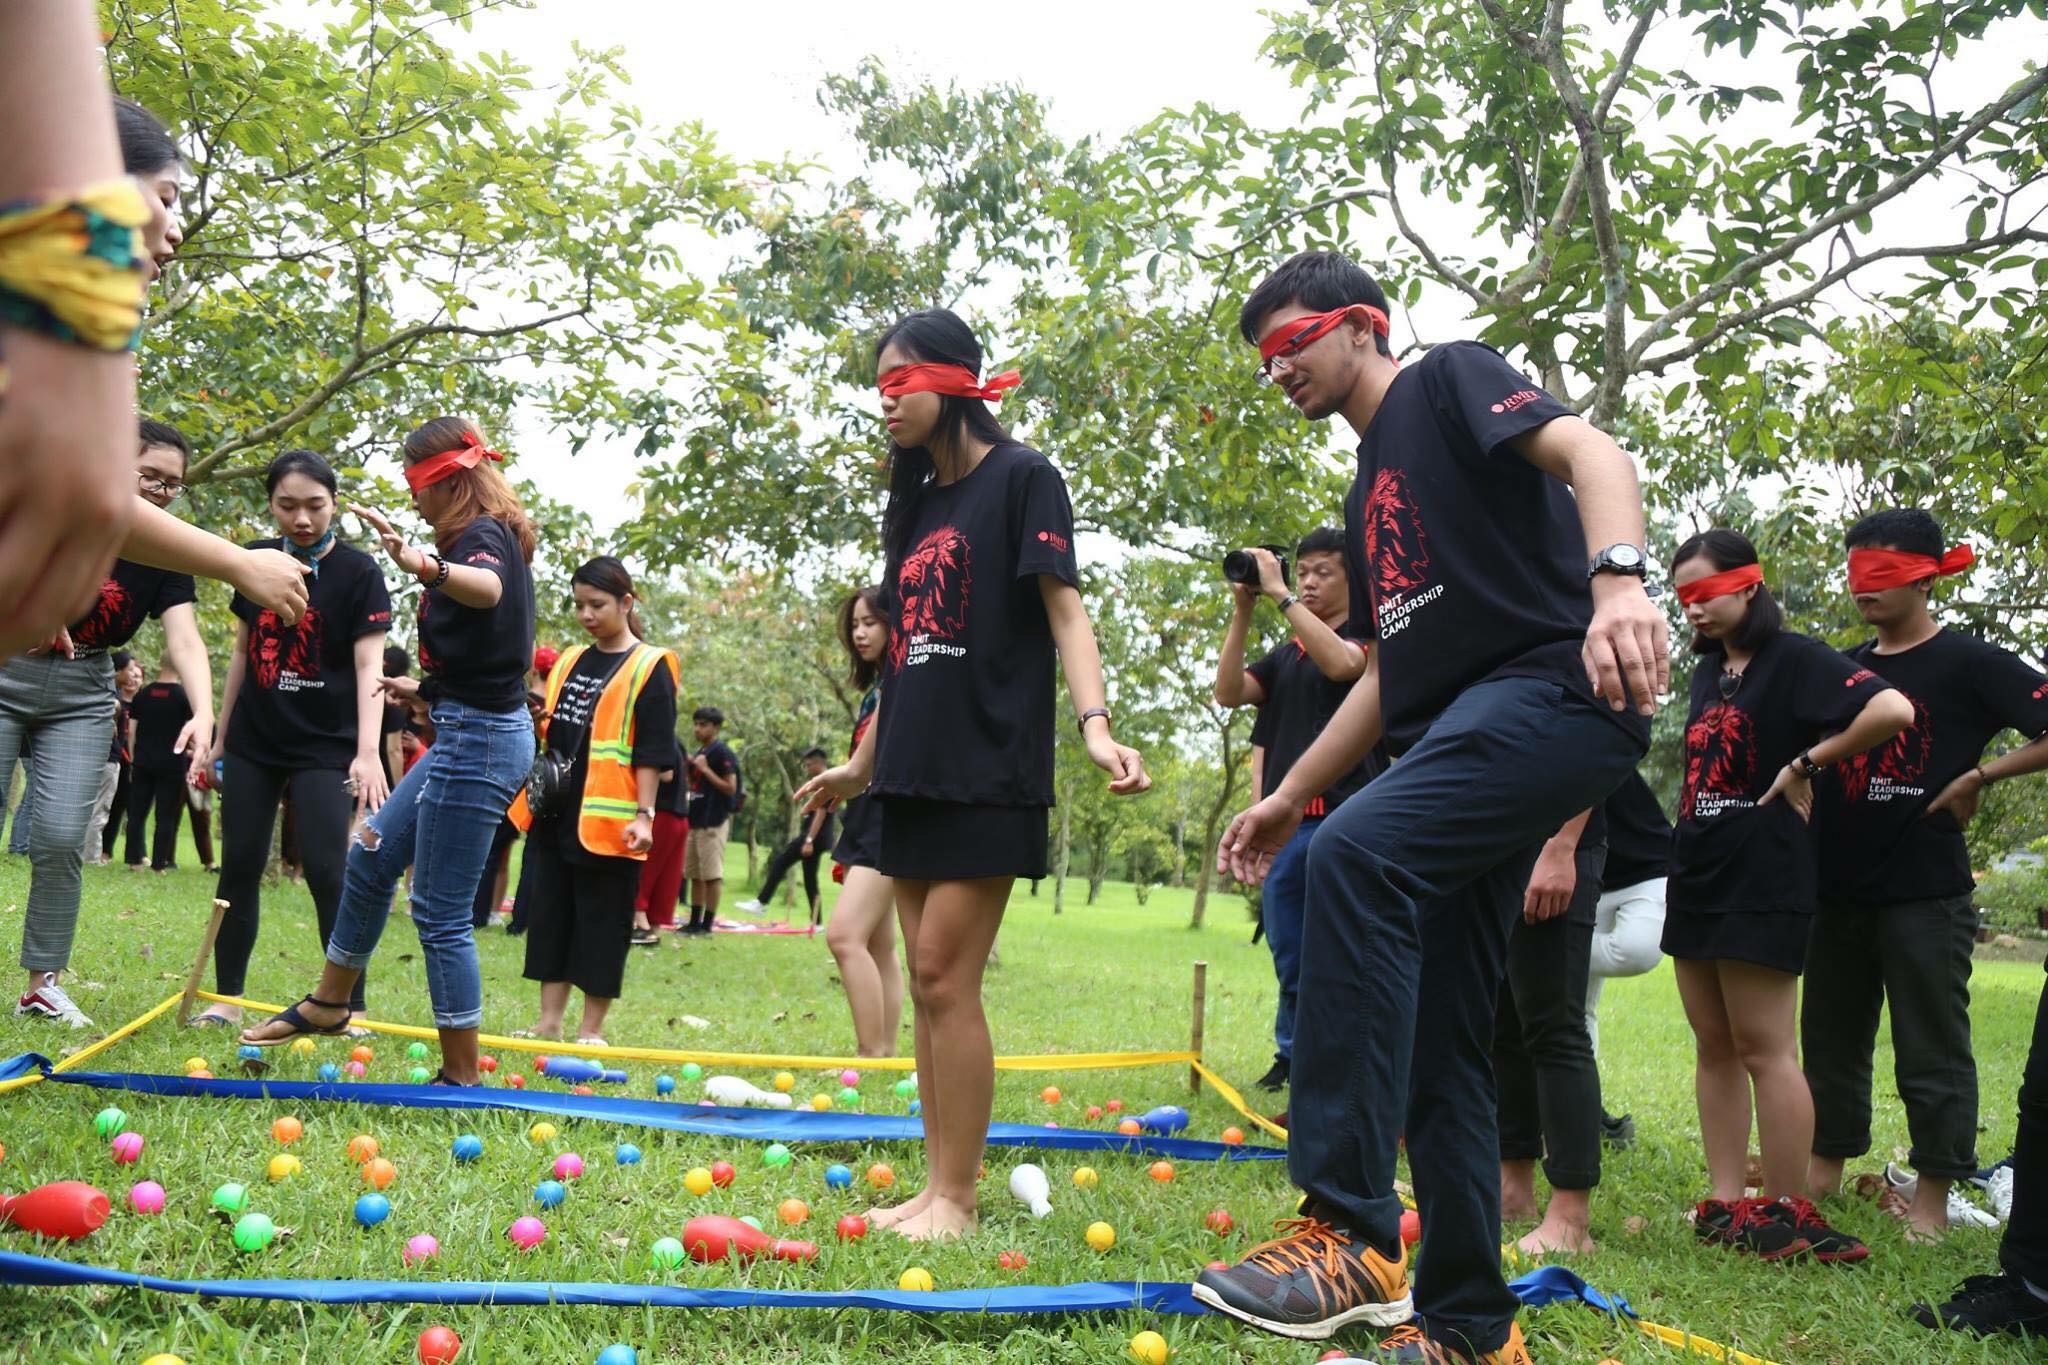 Bachelor of Engineering (Electrical and Electronic Engineering) student Utkarsh Sarbahi (in first row) and his friends take part in an energetic game at Leadership Camp.